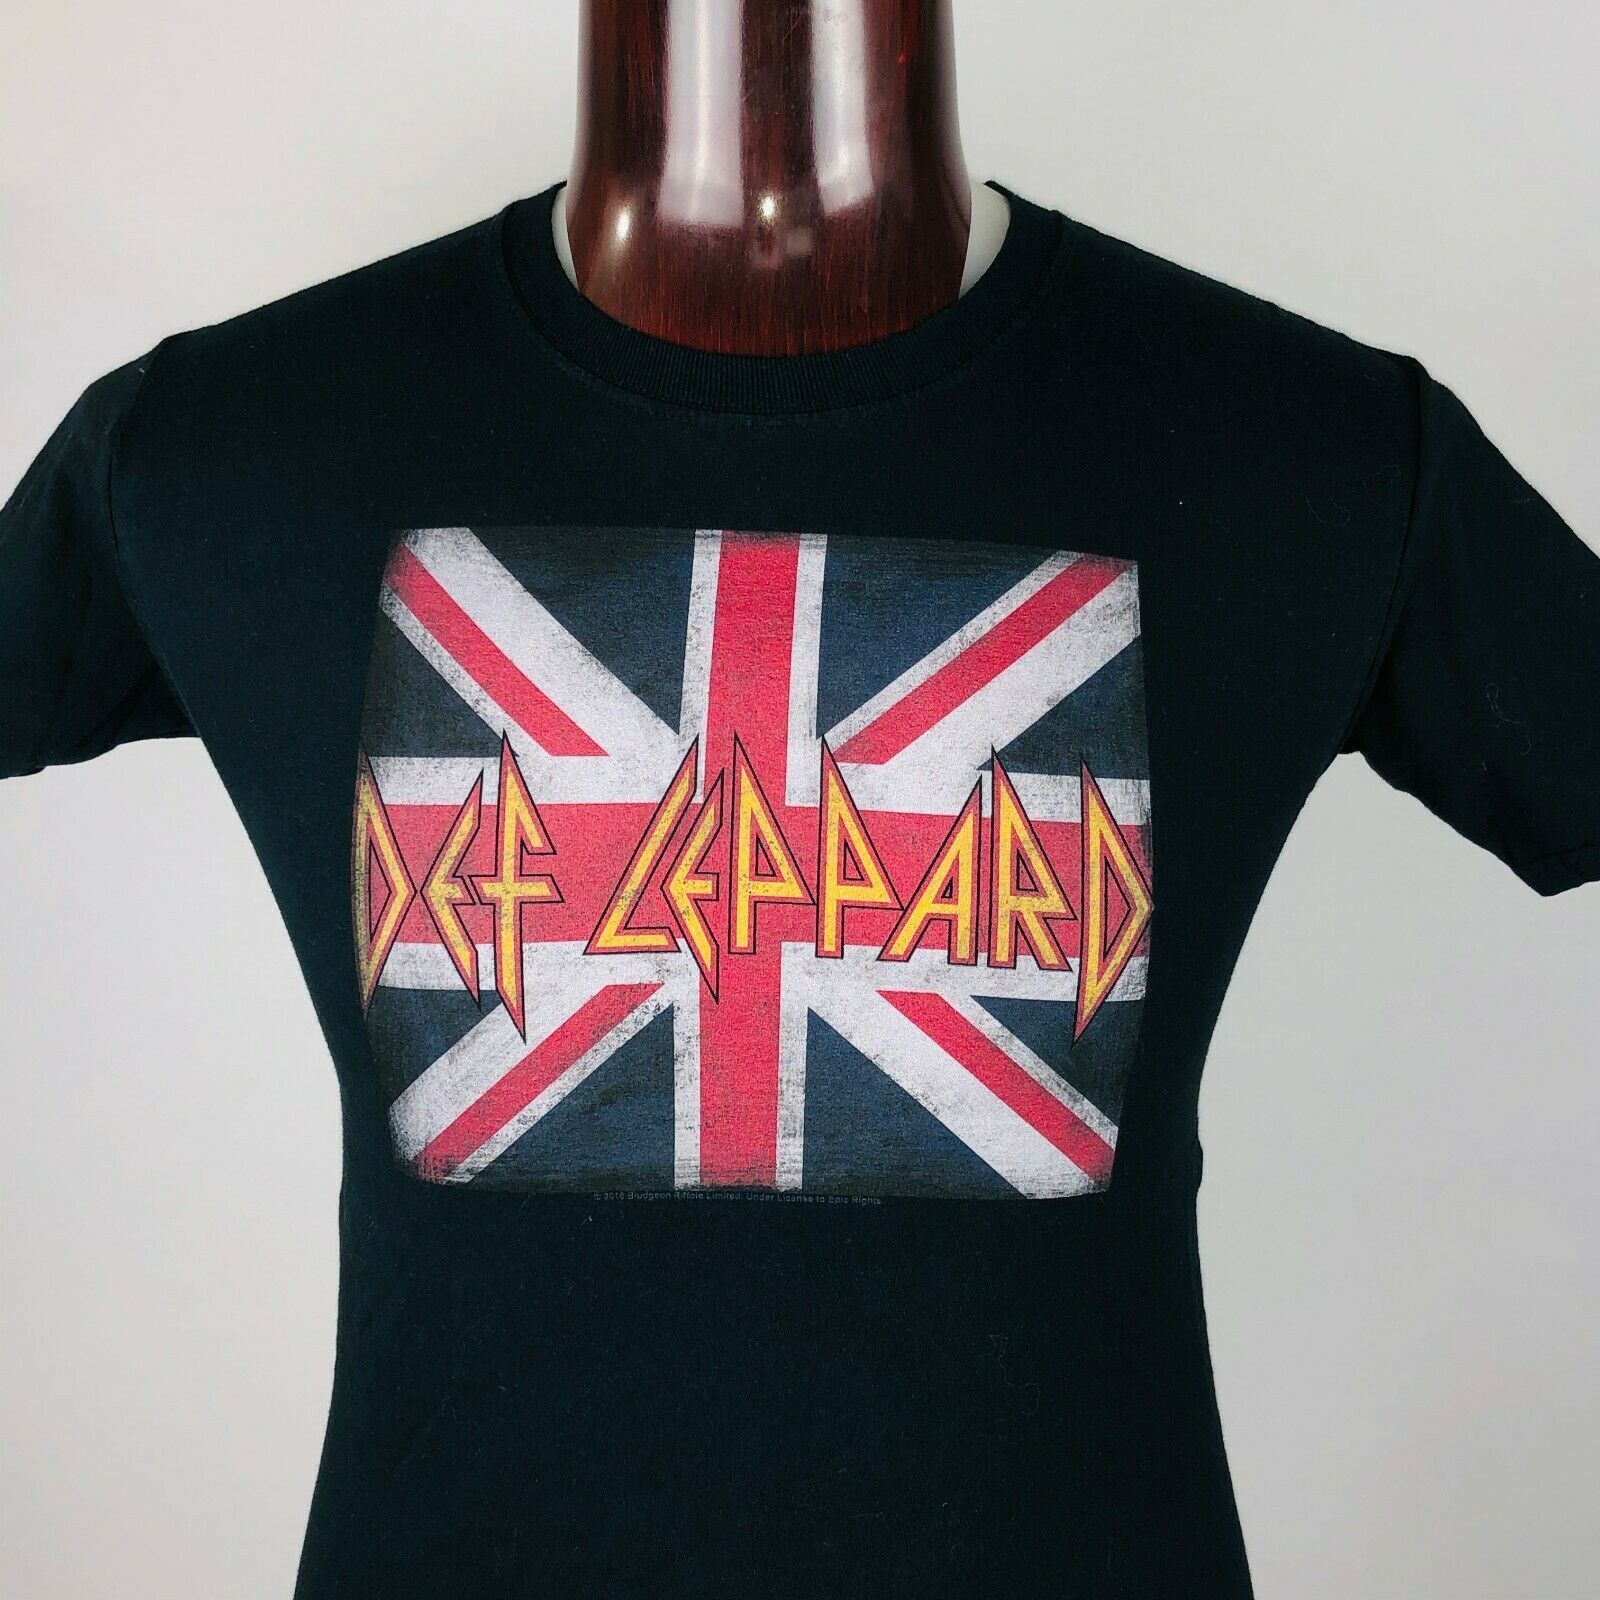 def leppard graphic tee